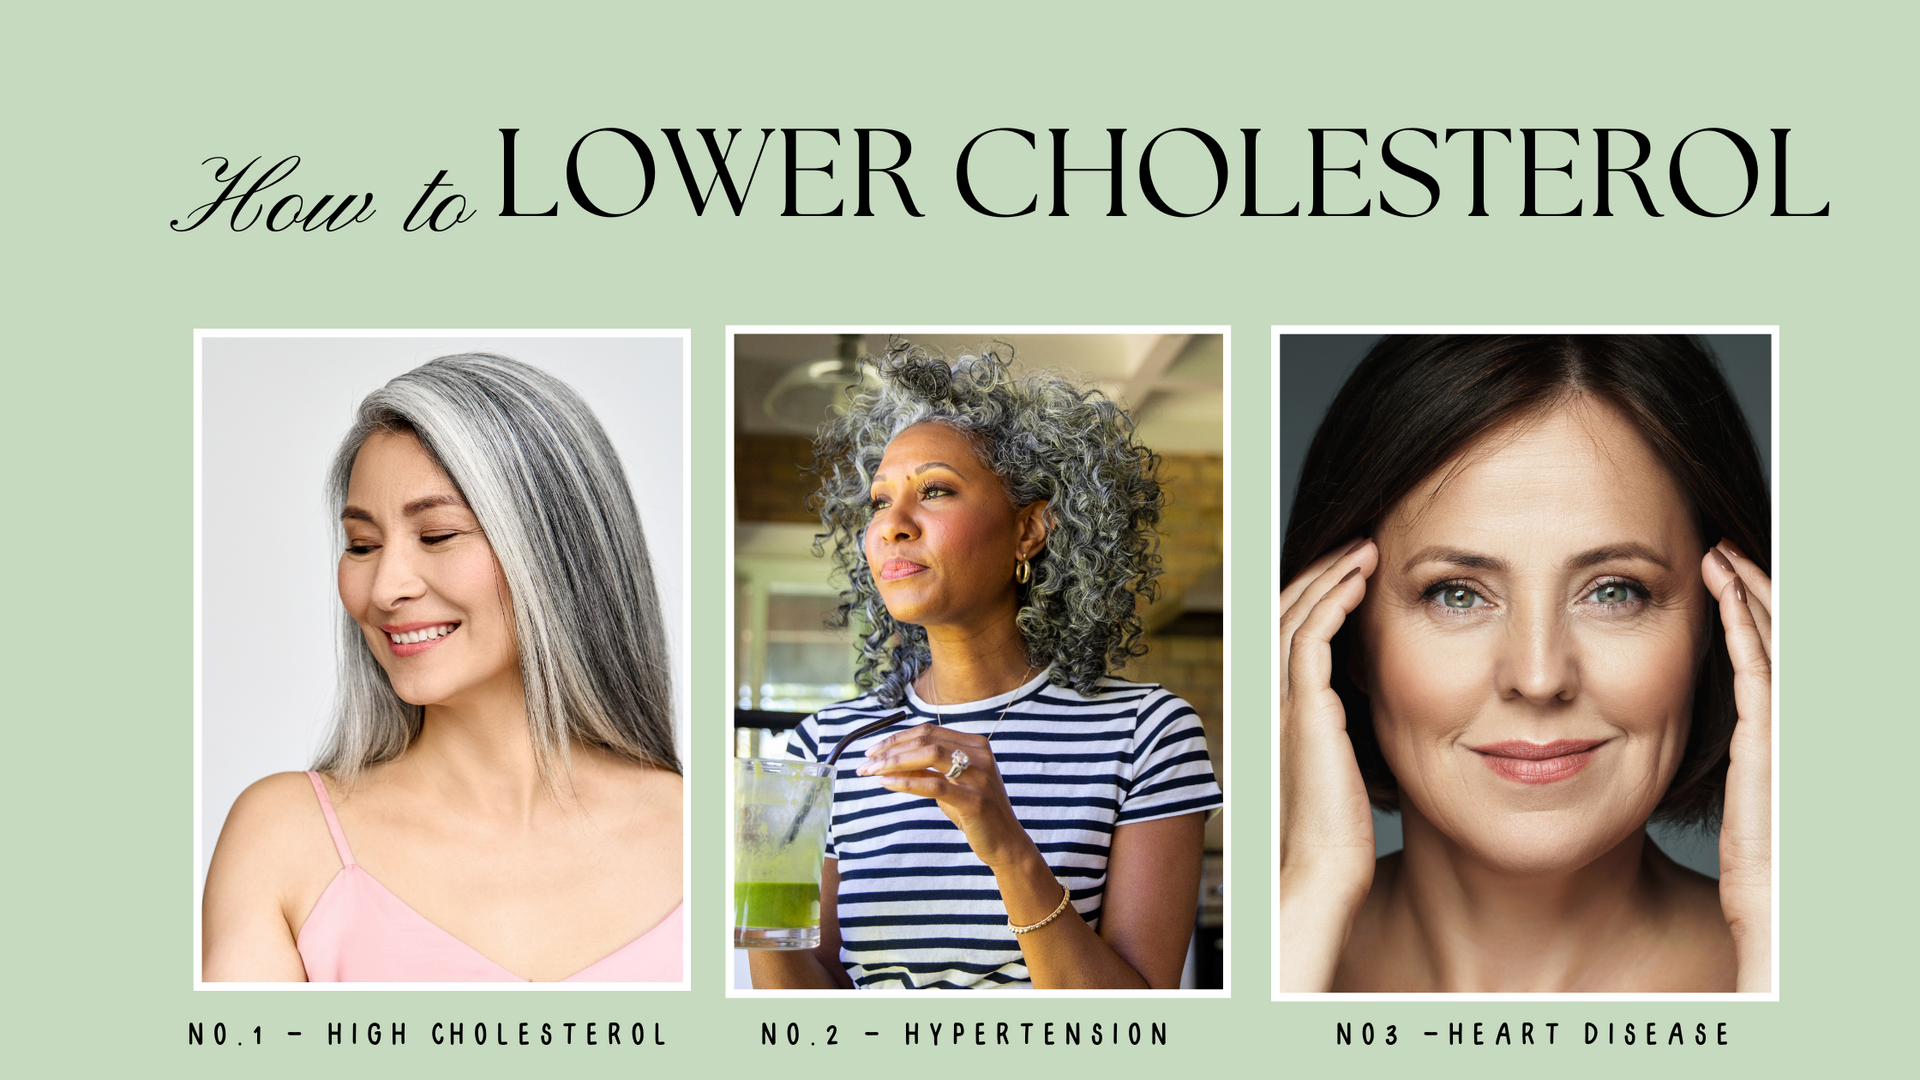 How to lower cholesterol. Image of three women in three separate boxes.